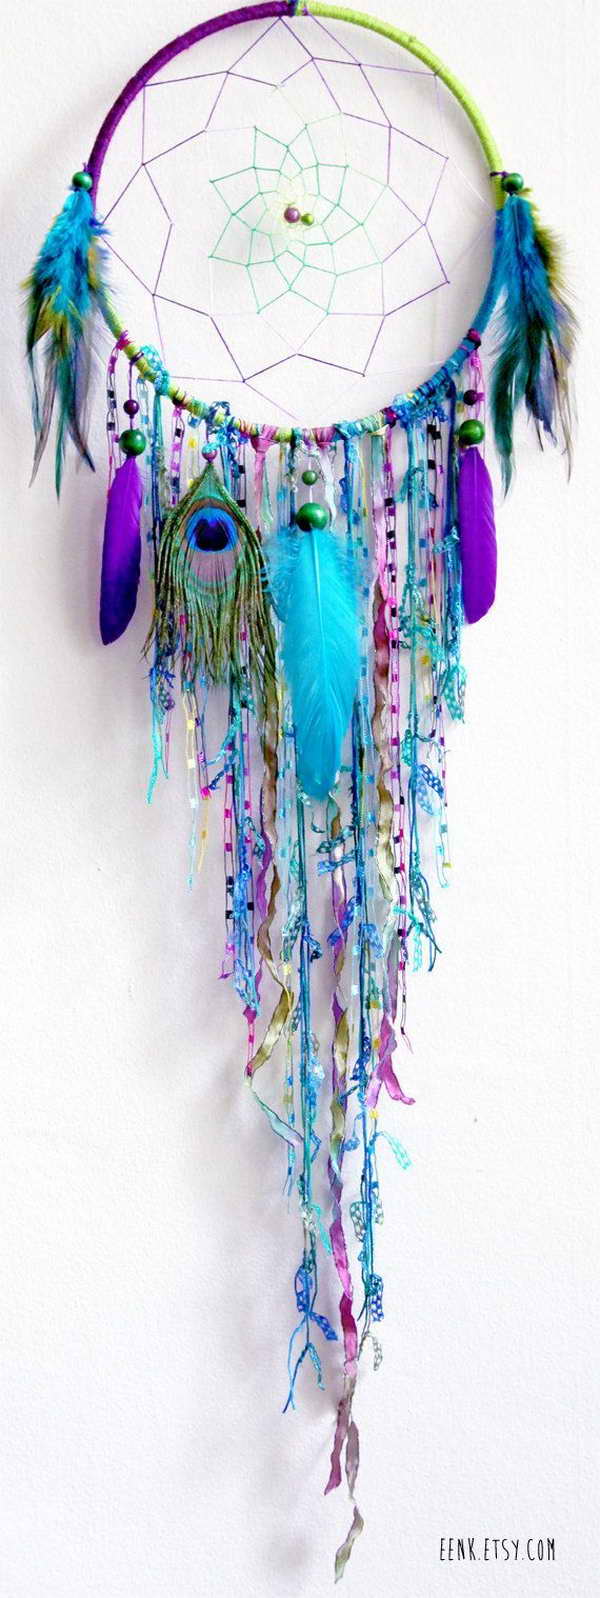 Create fun, easy and beautiful dream catchers as your next great DIY project. Check out inspiring ideas.